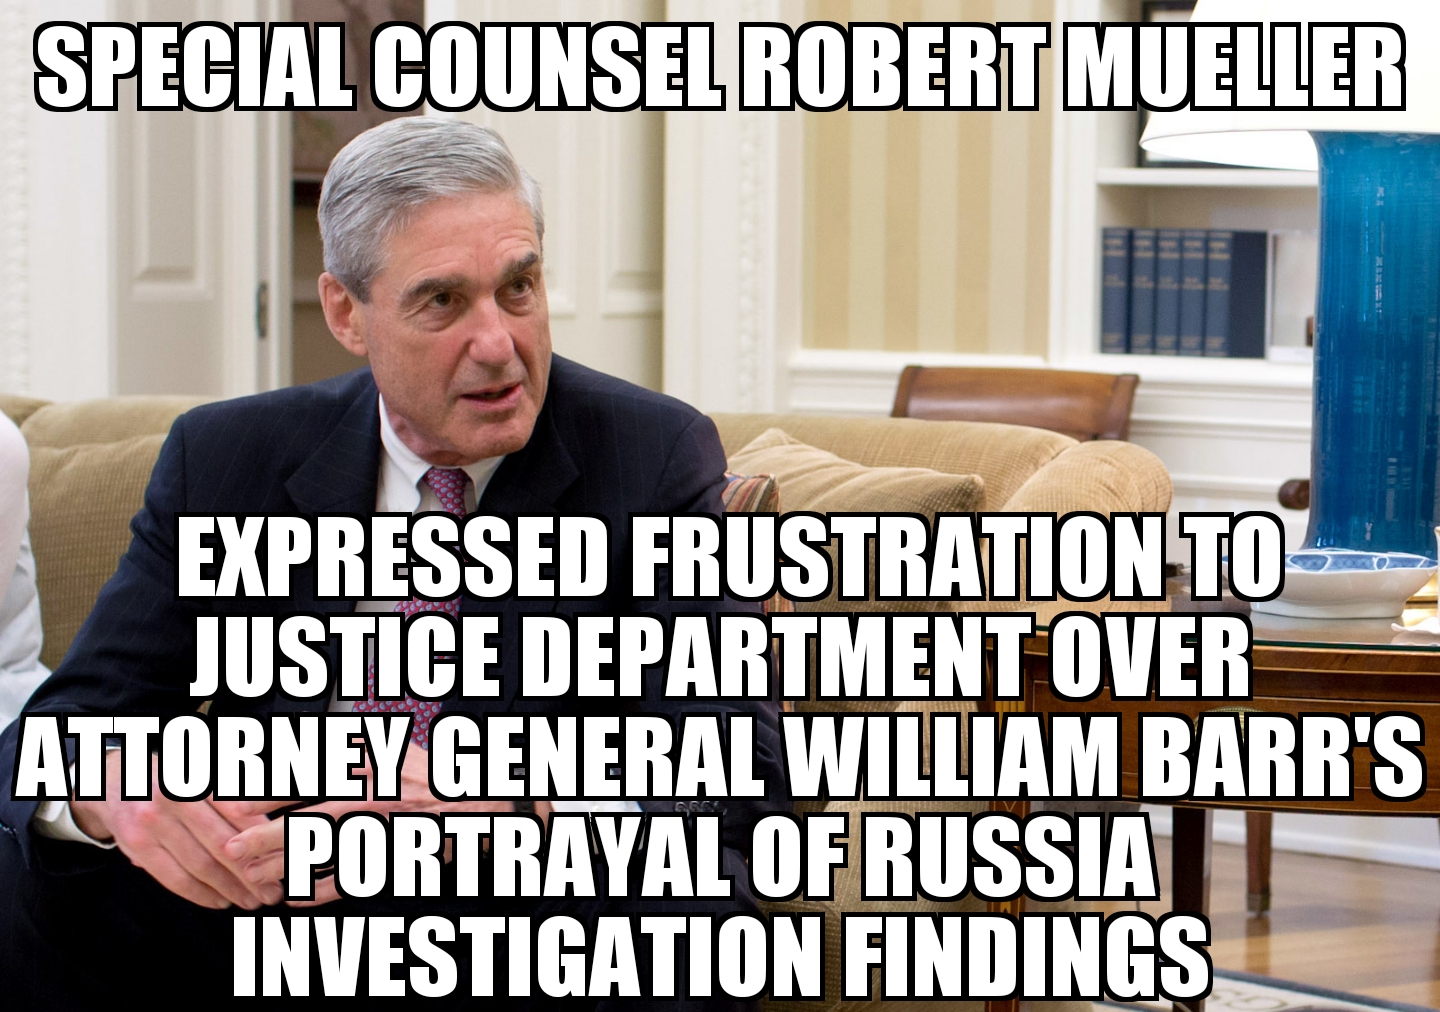 Mueller expressed frustration over Barr portrayal of Russia Investigation findings